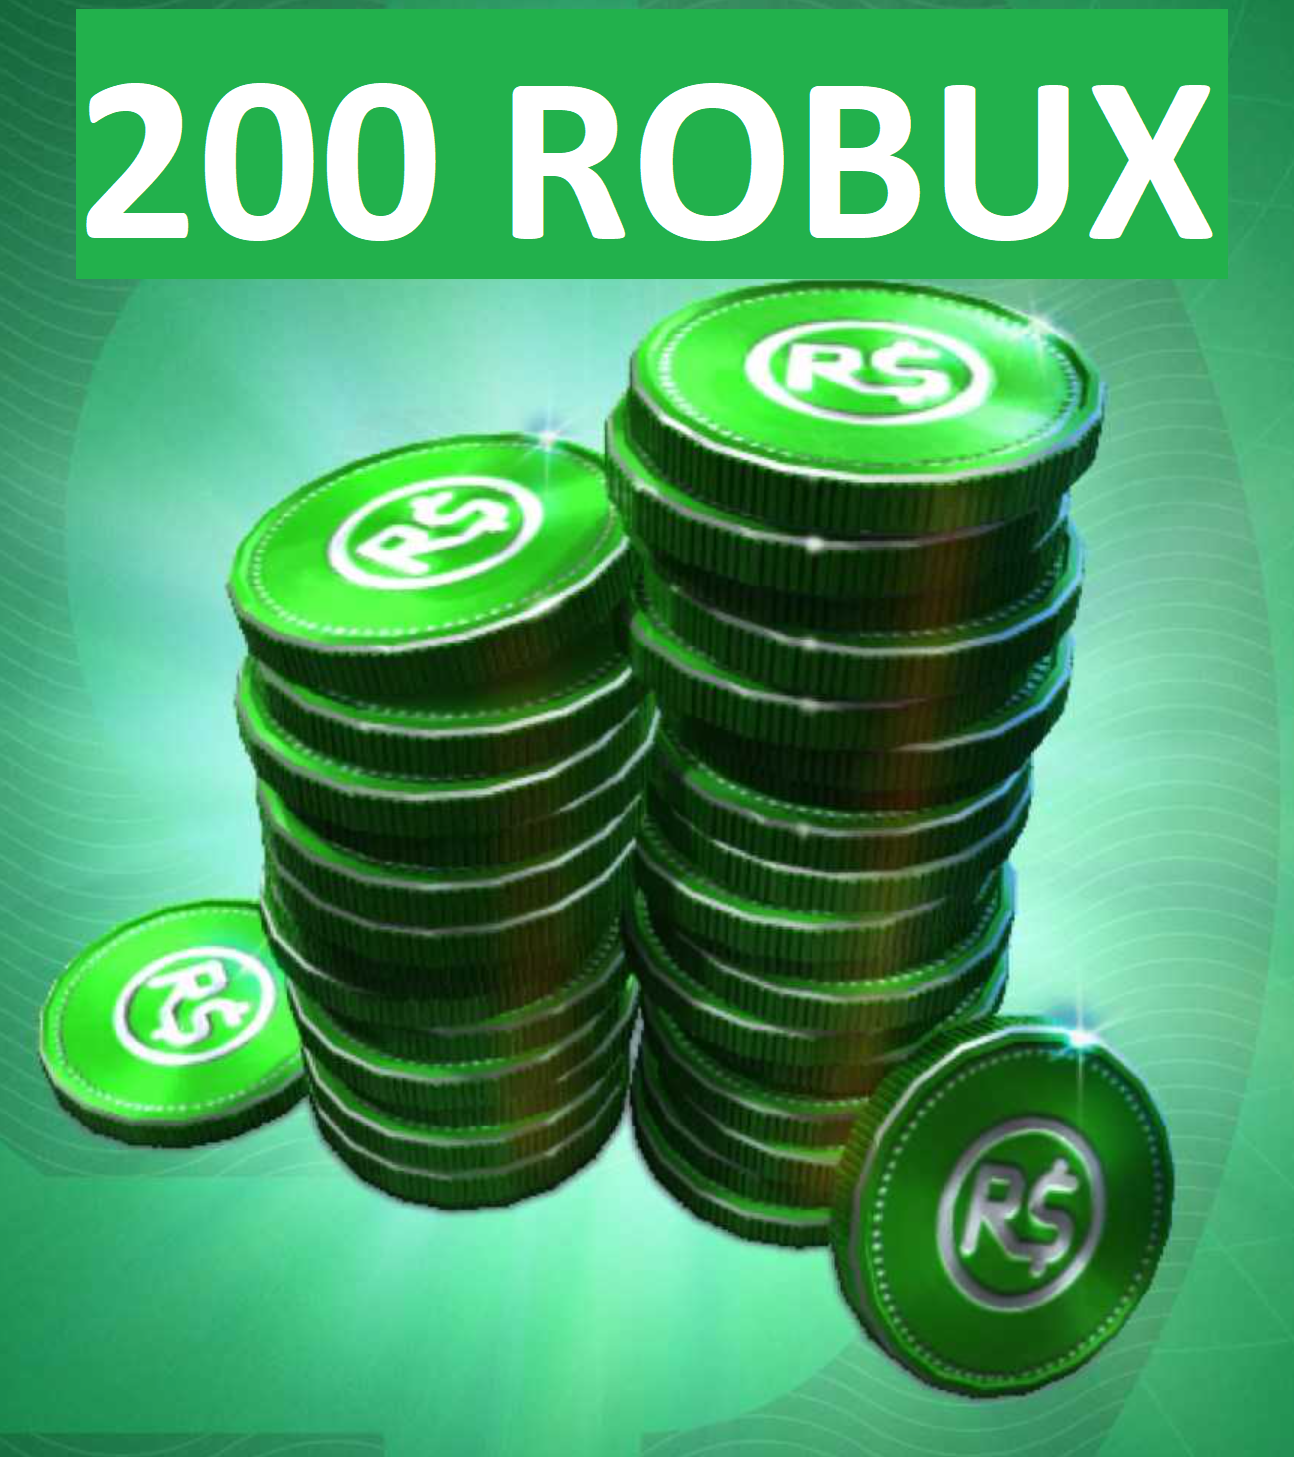 Buy Roblox Gift Card 200 Robux Global And Download - 200 gift card roblox